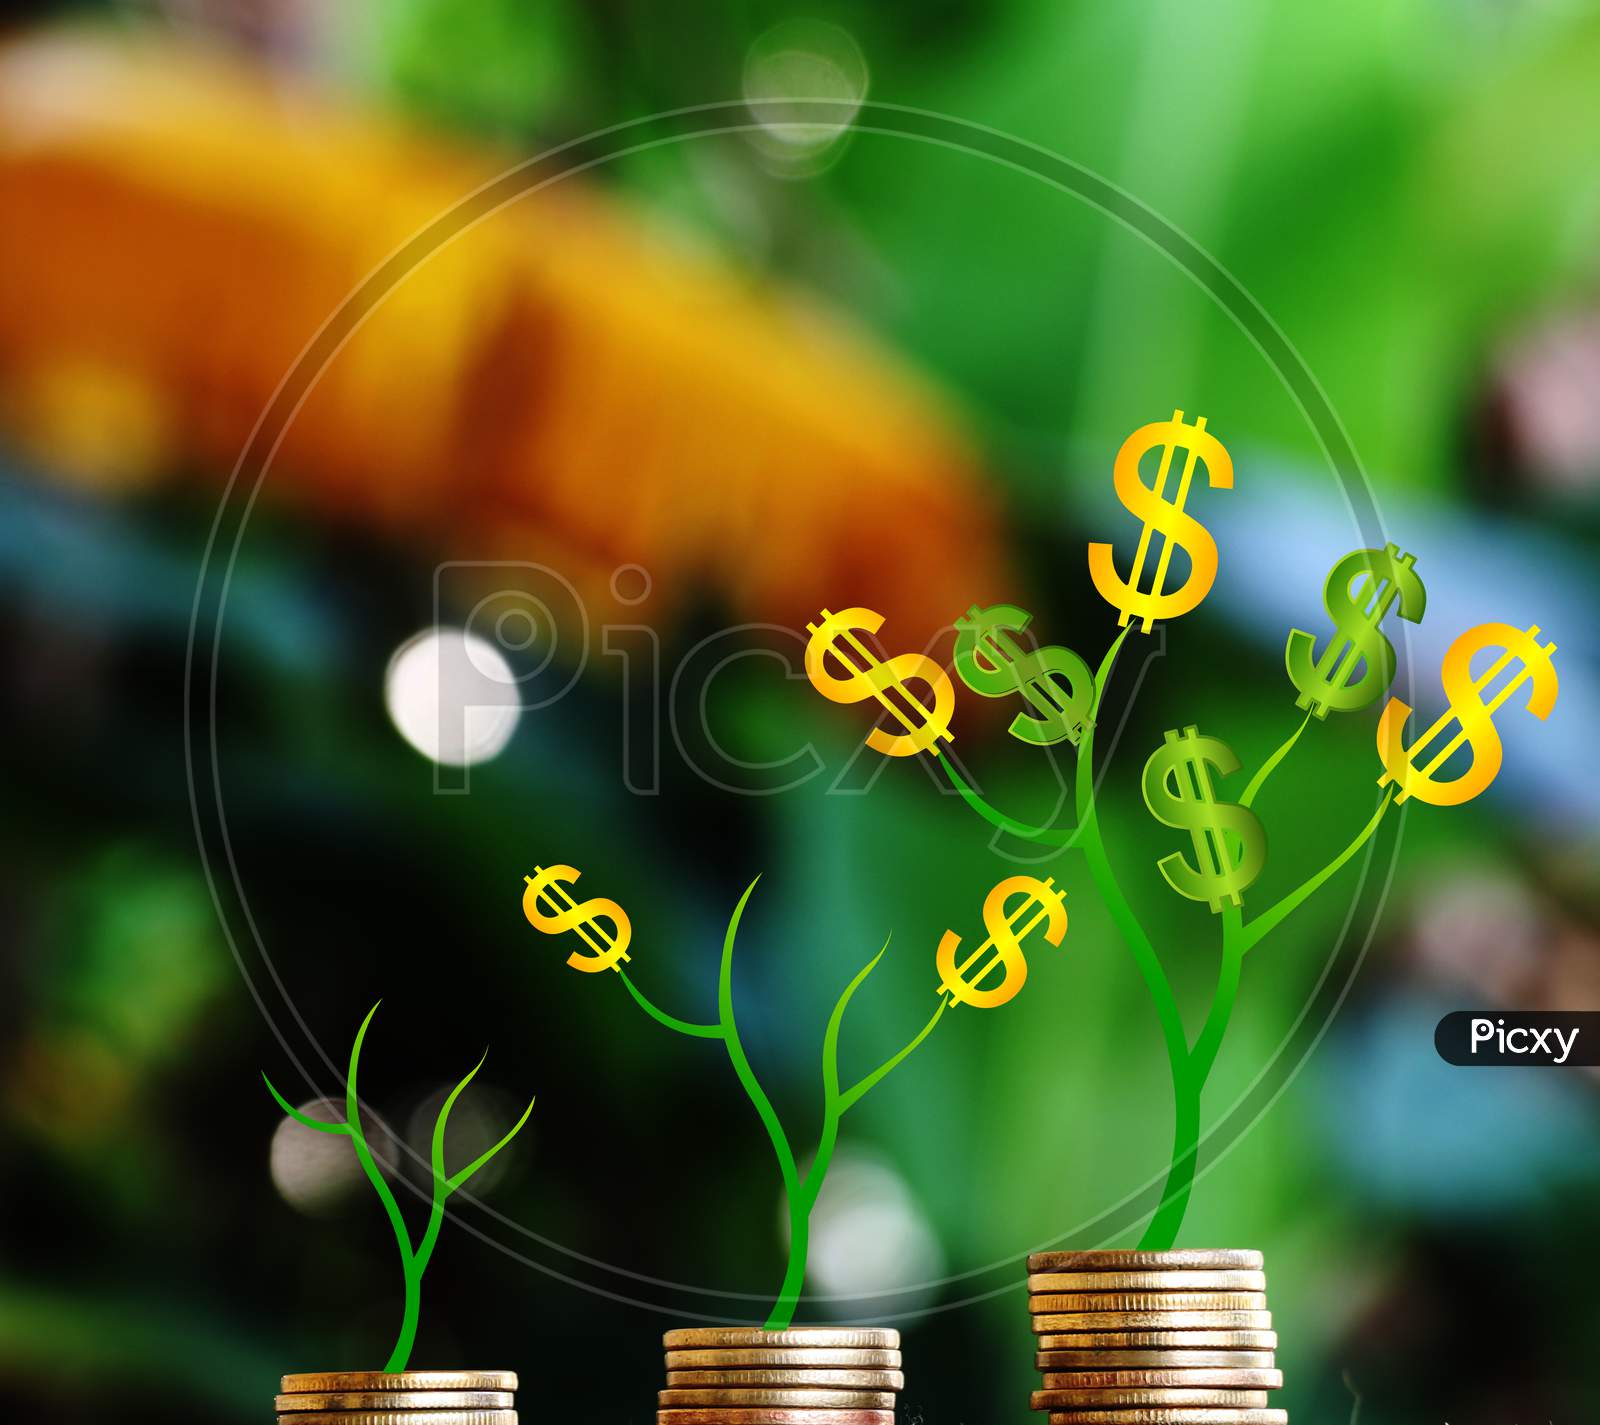 Plant Grow On Money Stacks In An Environment. Money-Saving And Sustainable Business Investment Idea